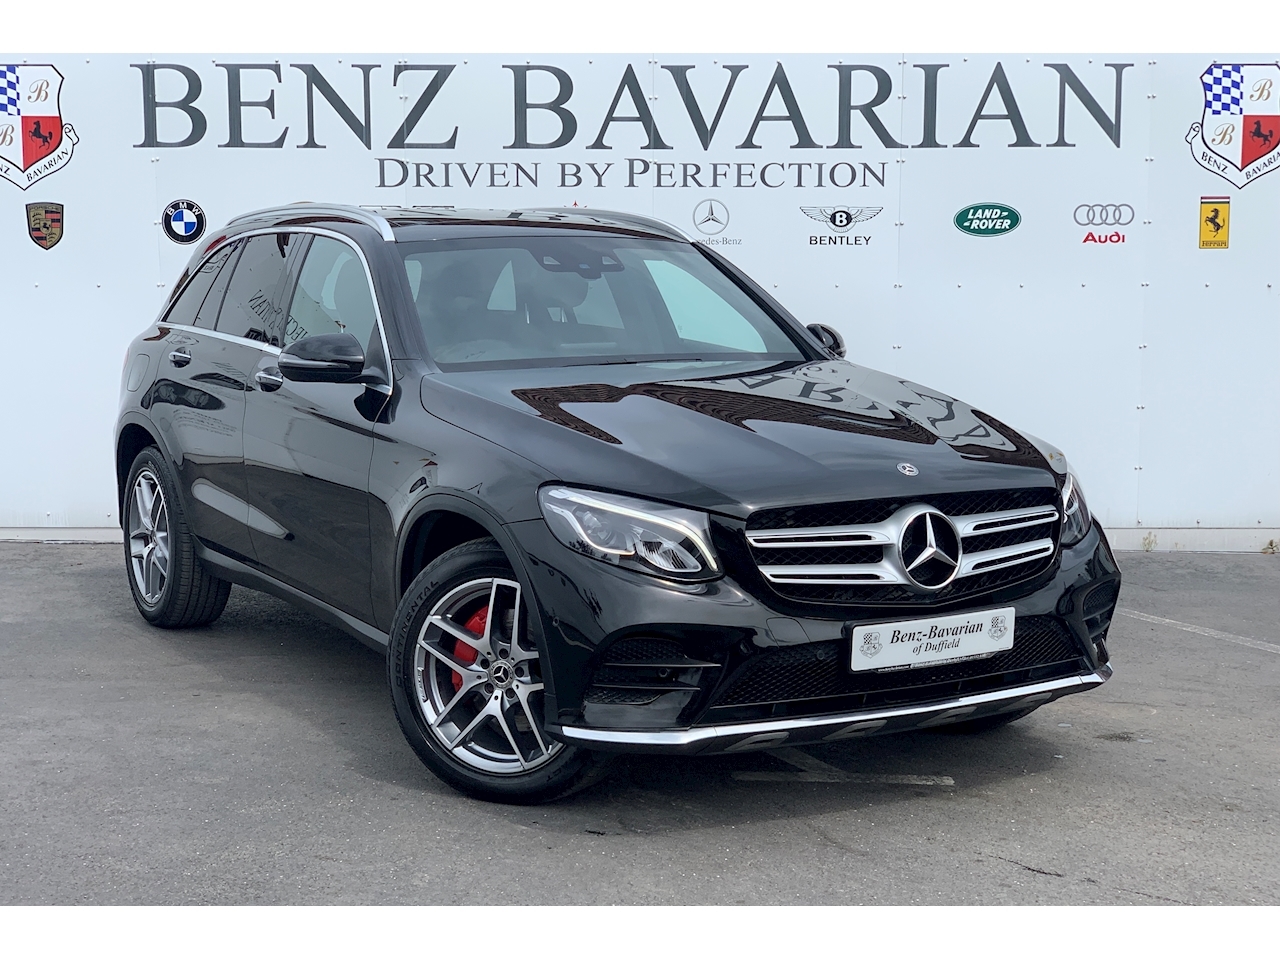 2.1 GLC220d AMG Line (Premium) SUV 5dr Diesel G-Tronic 4MATIC (s/s) (170 ps)